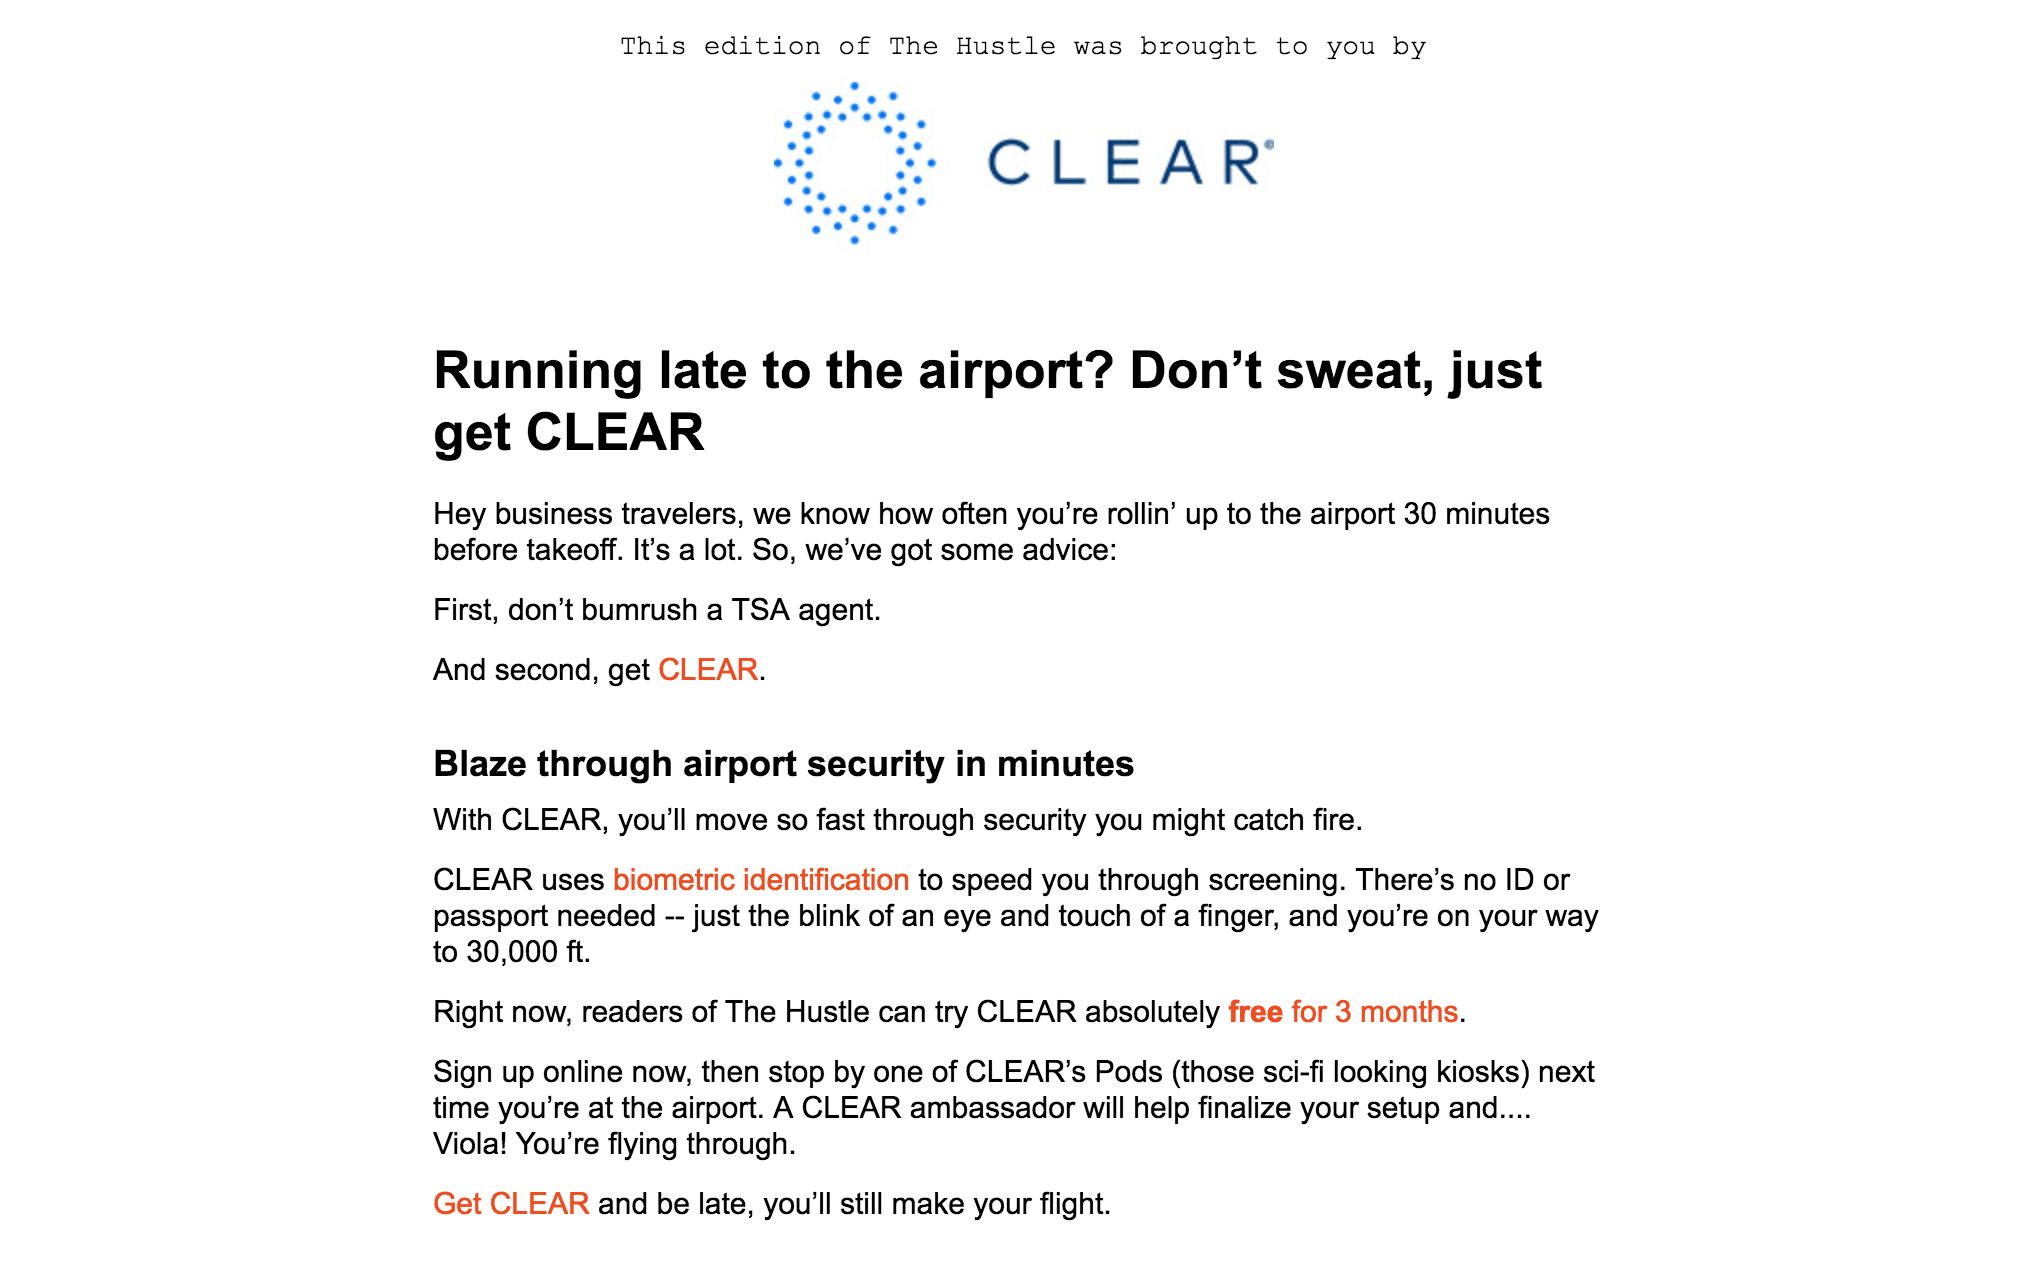 CLEAR's email sponsorship in The Hustle.